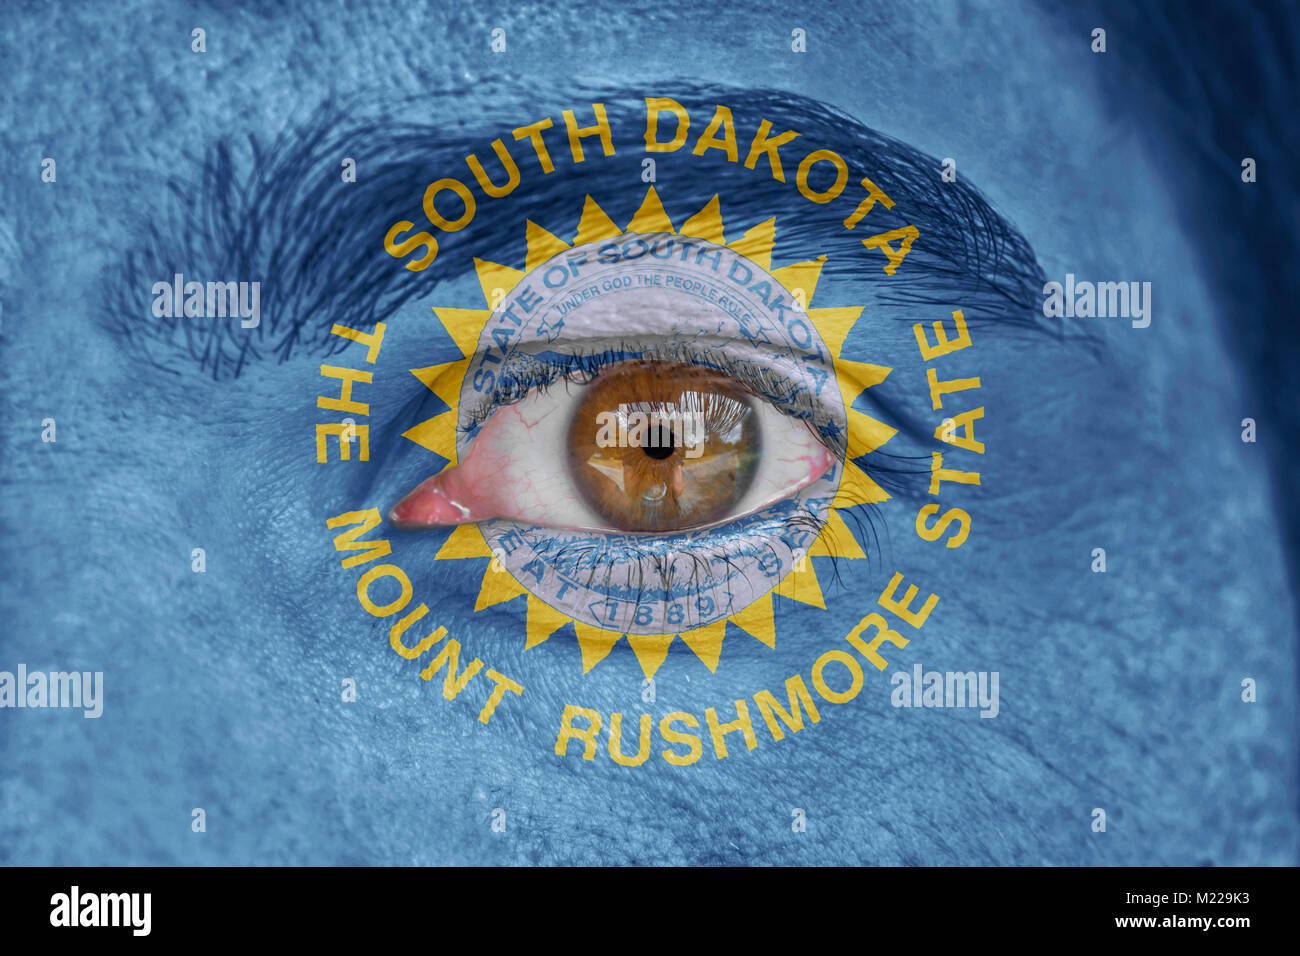 Human face and eye painted with US state flag of South Dakota Stock Photo